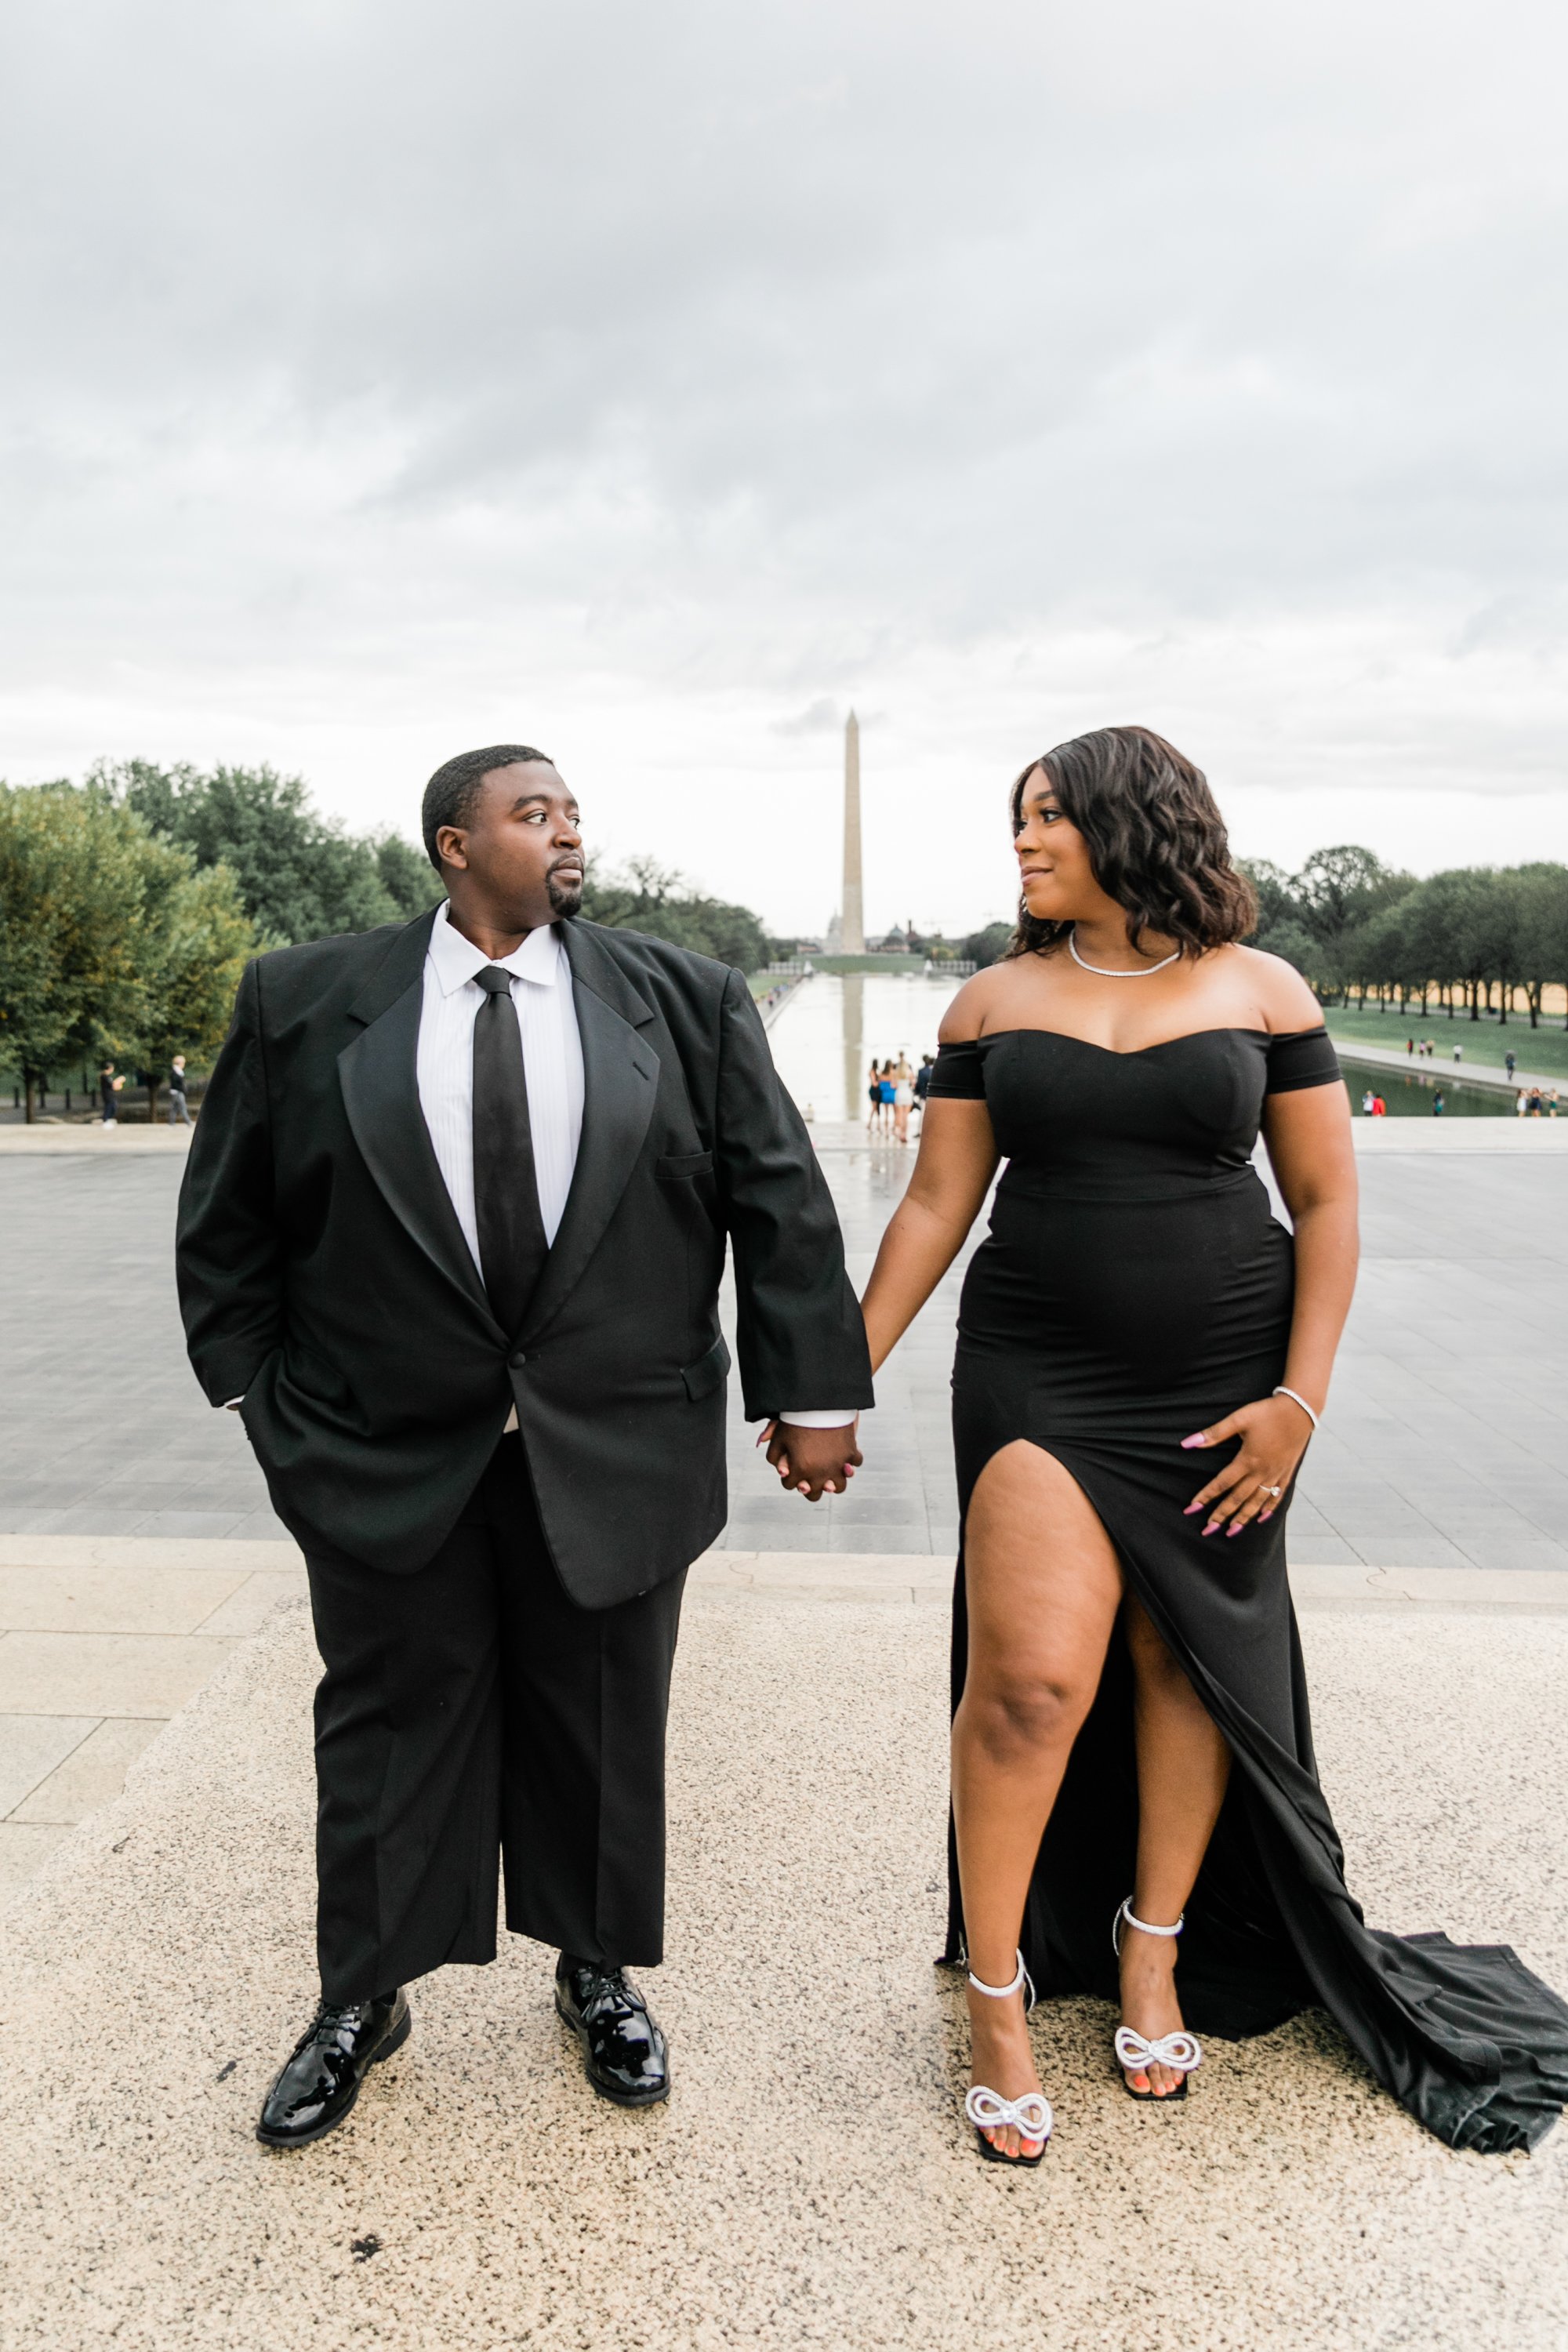 Best Black Wedding Photographers in Washington DC Megapixels Media Photography Engagement Photos at the Lincoln Memorial-48.jpg